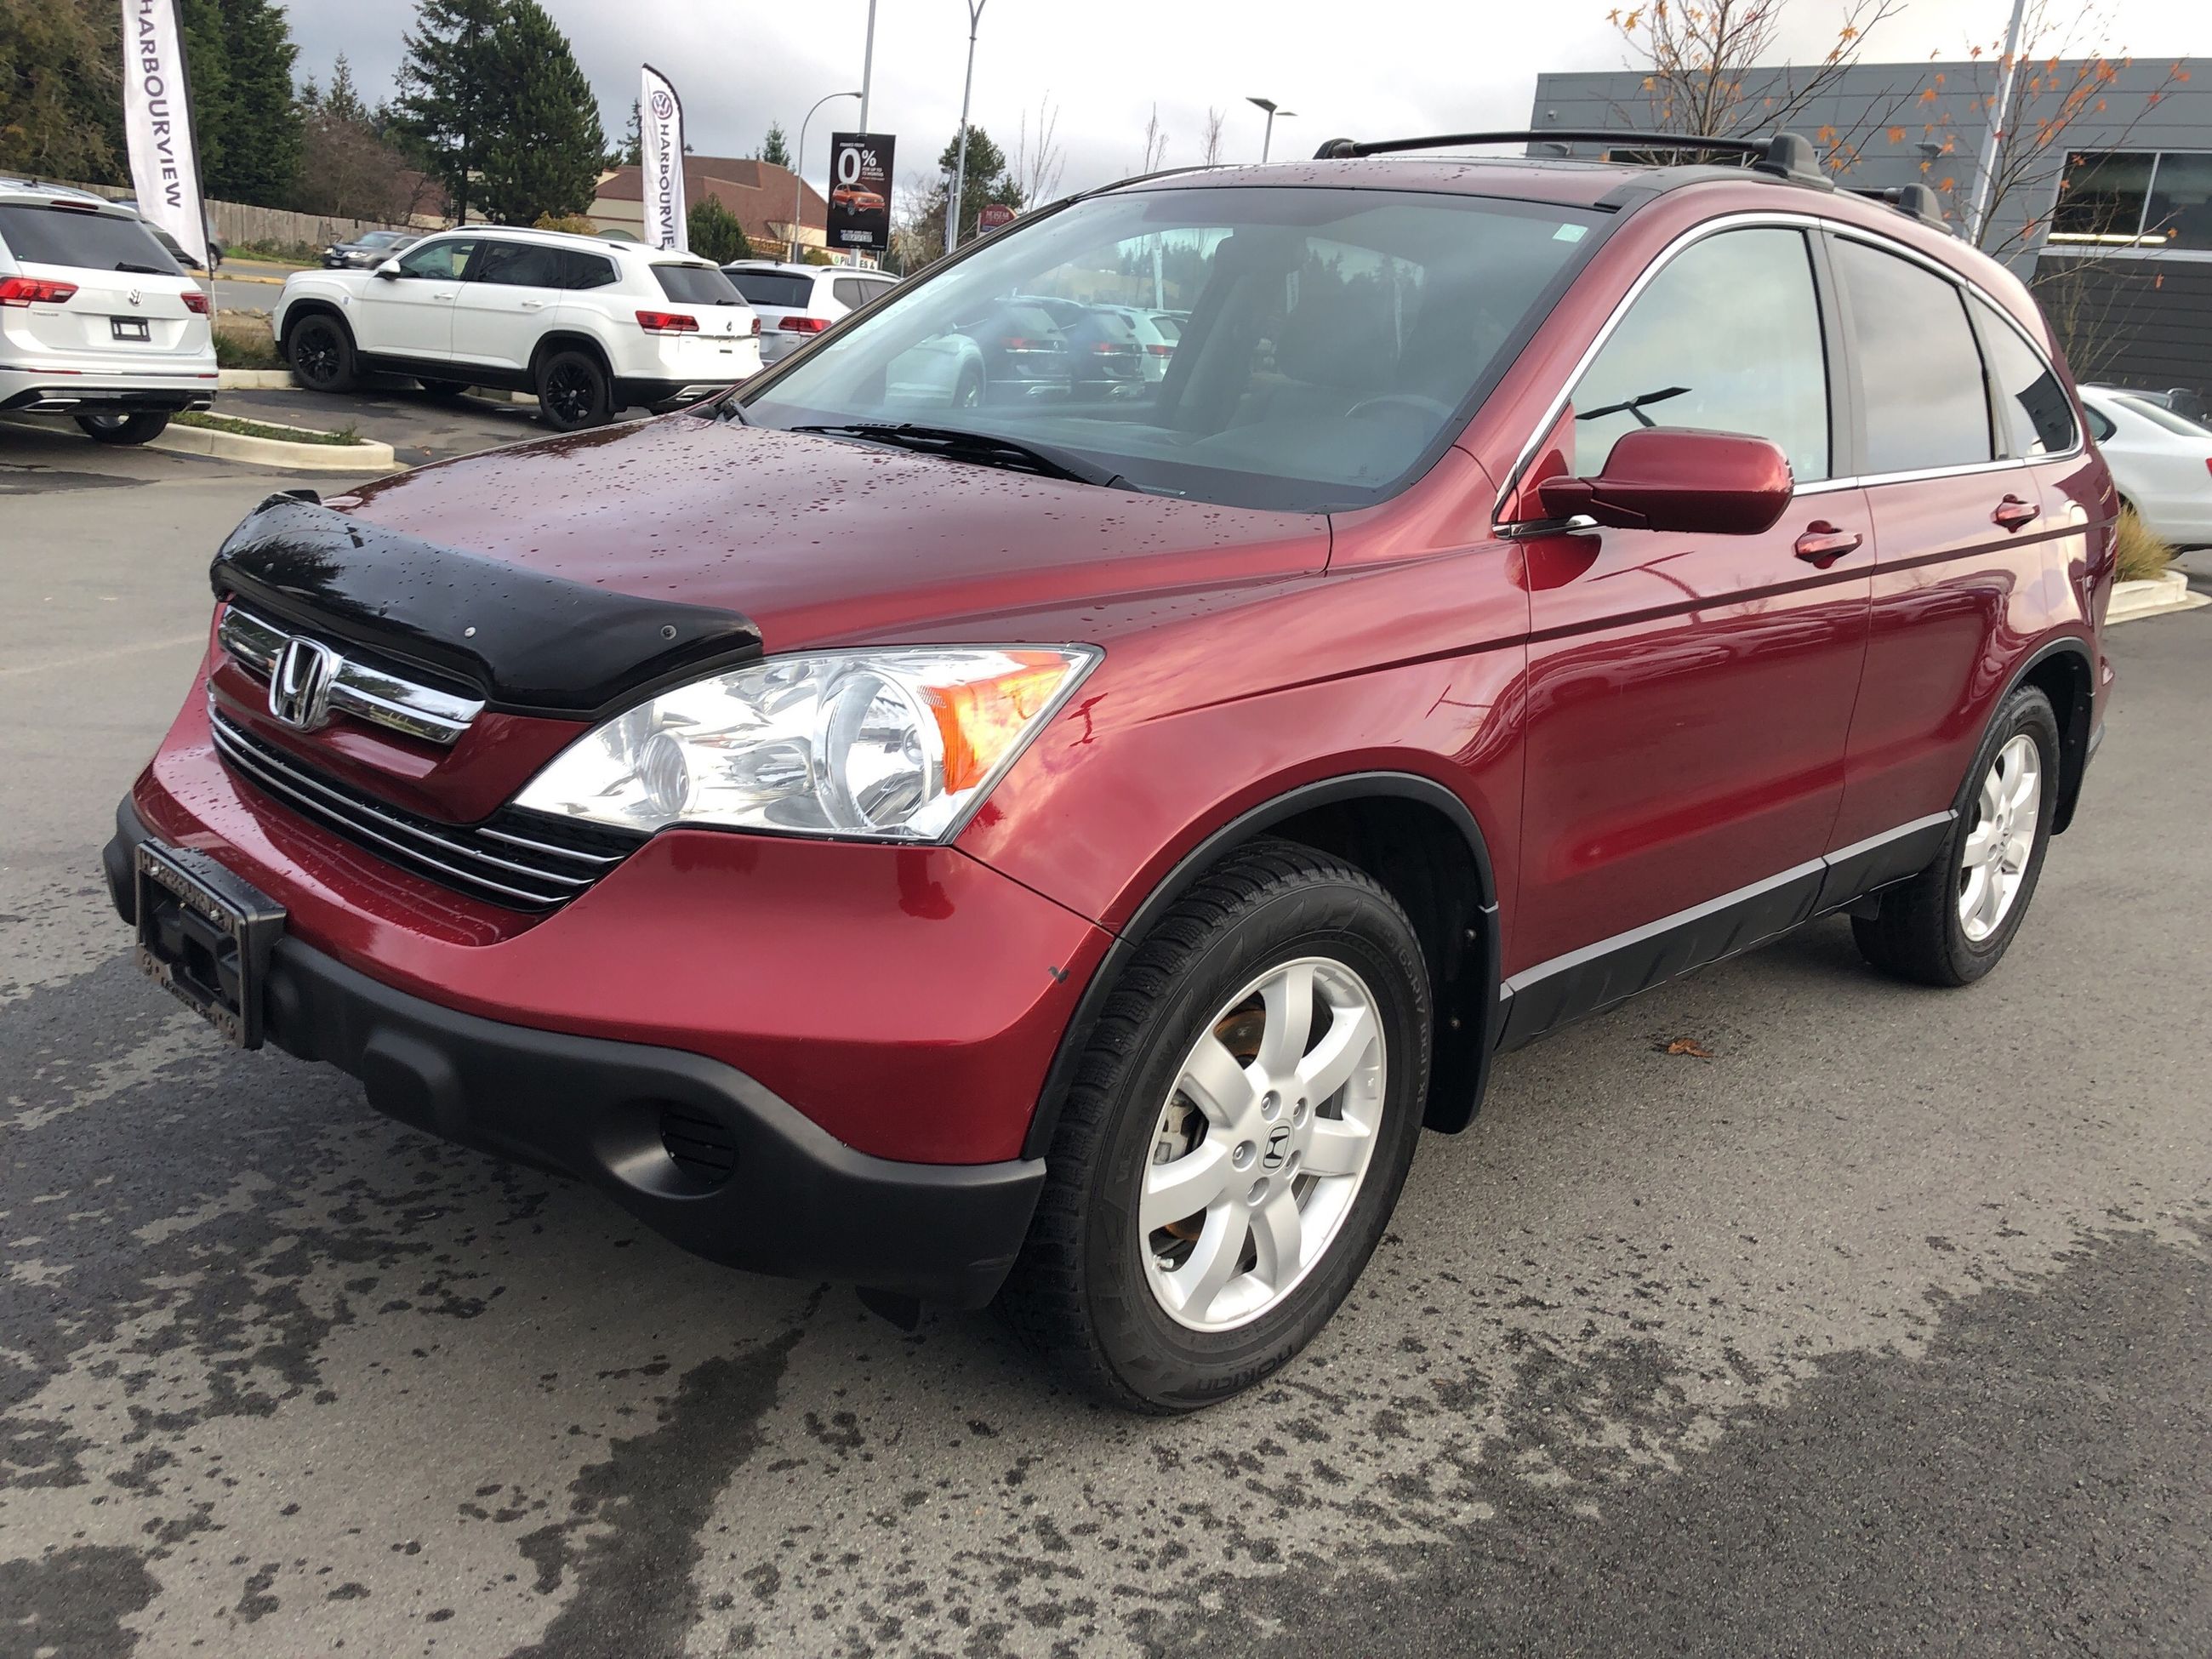 Used 2008 Honda CRV Touring for Sale 12995